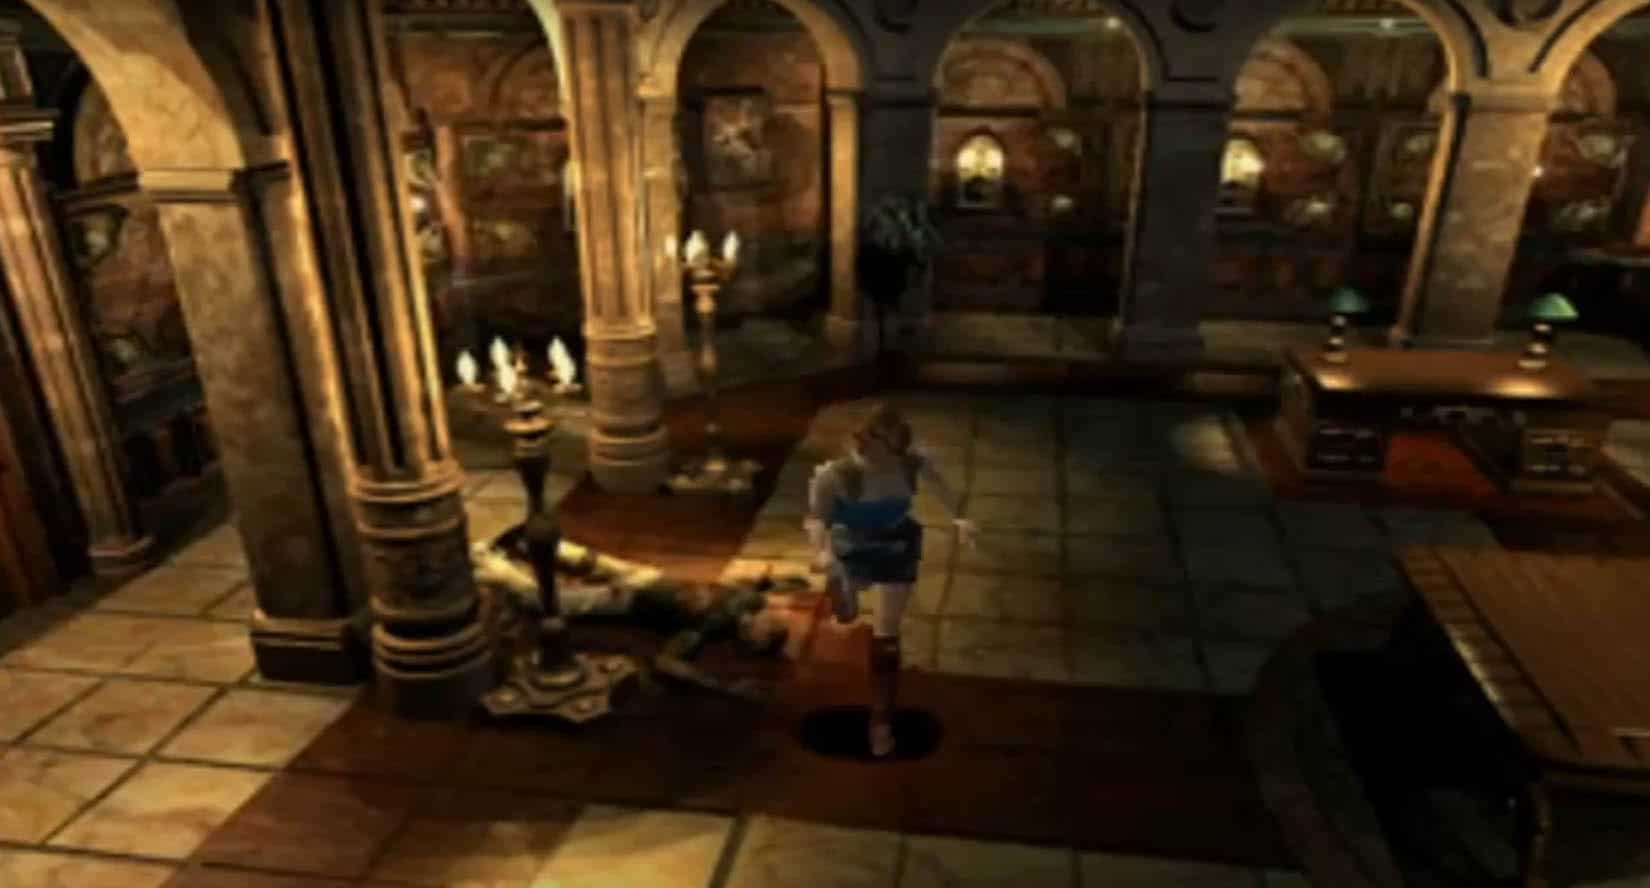 download nemesis clock tower fight ps1